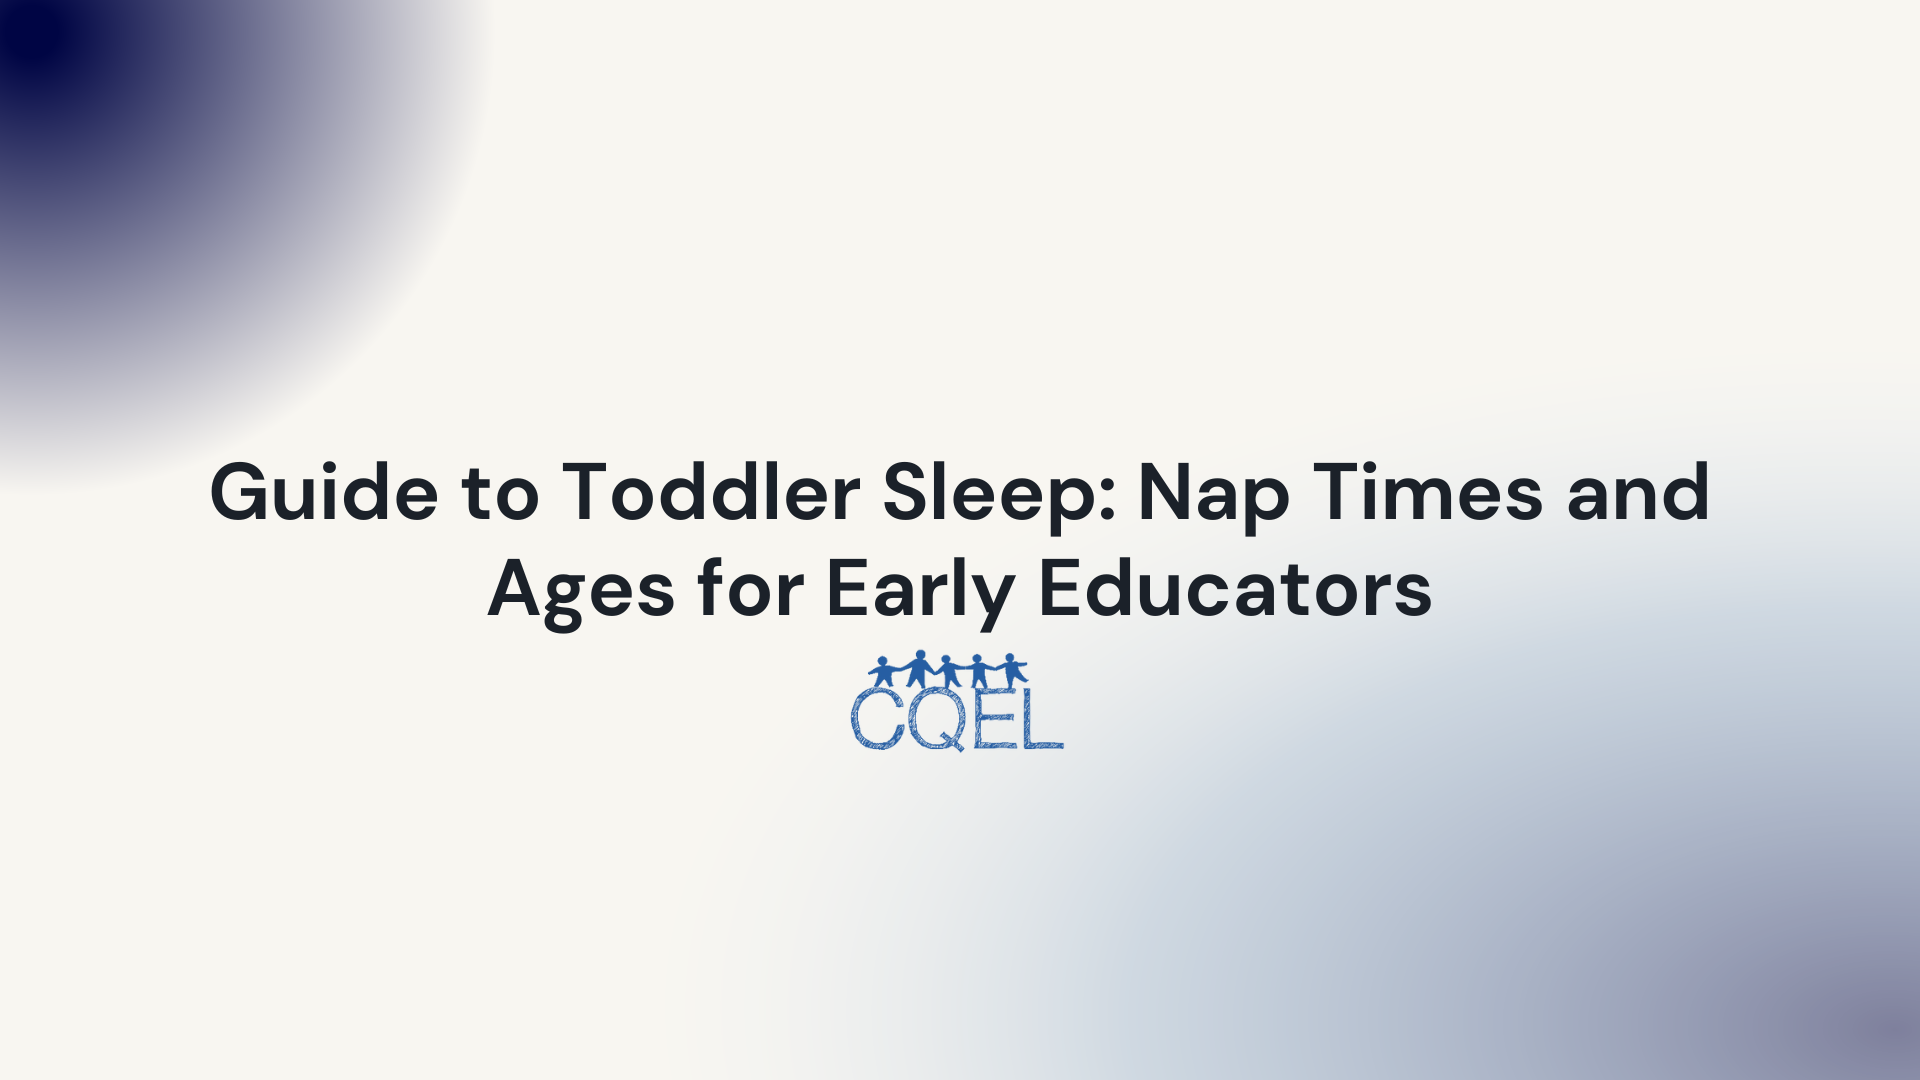 Guide to Toddler Sleep: Nap Times and Ages for Early Educators